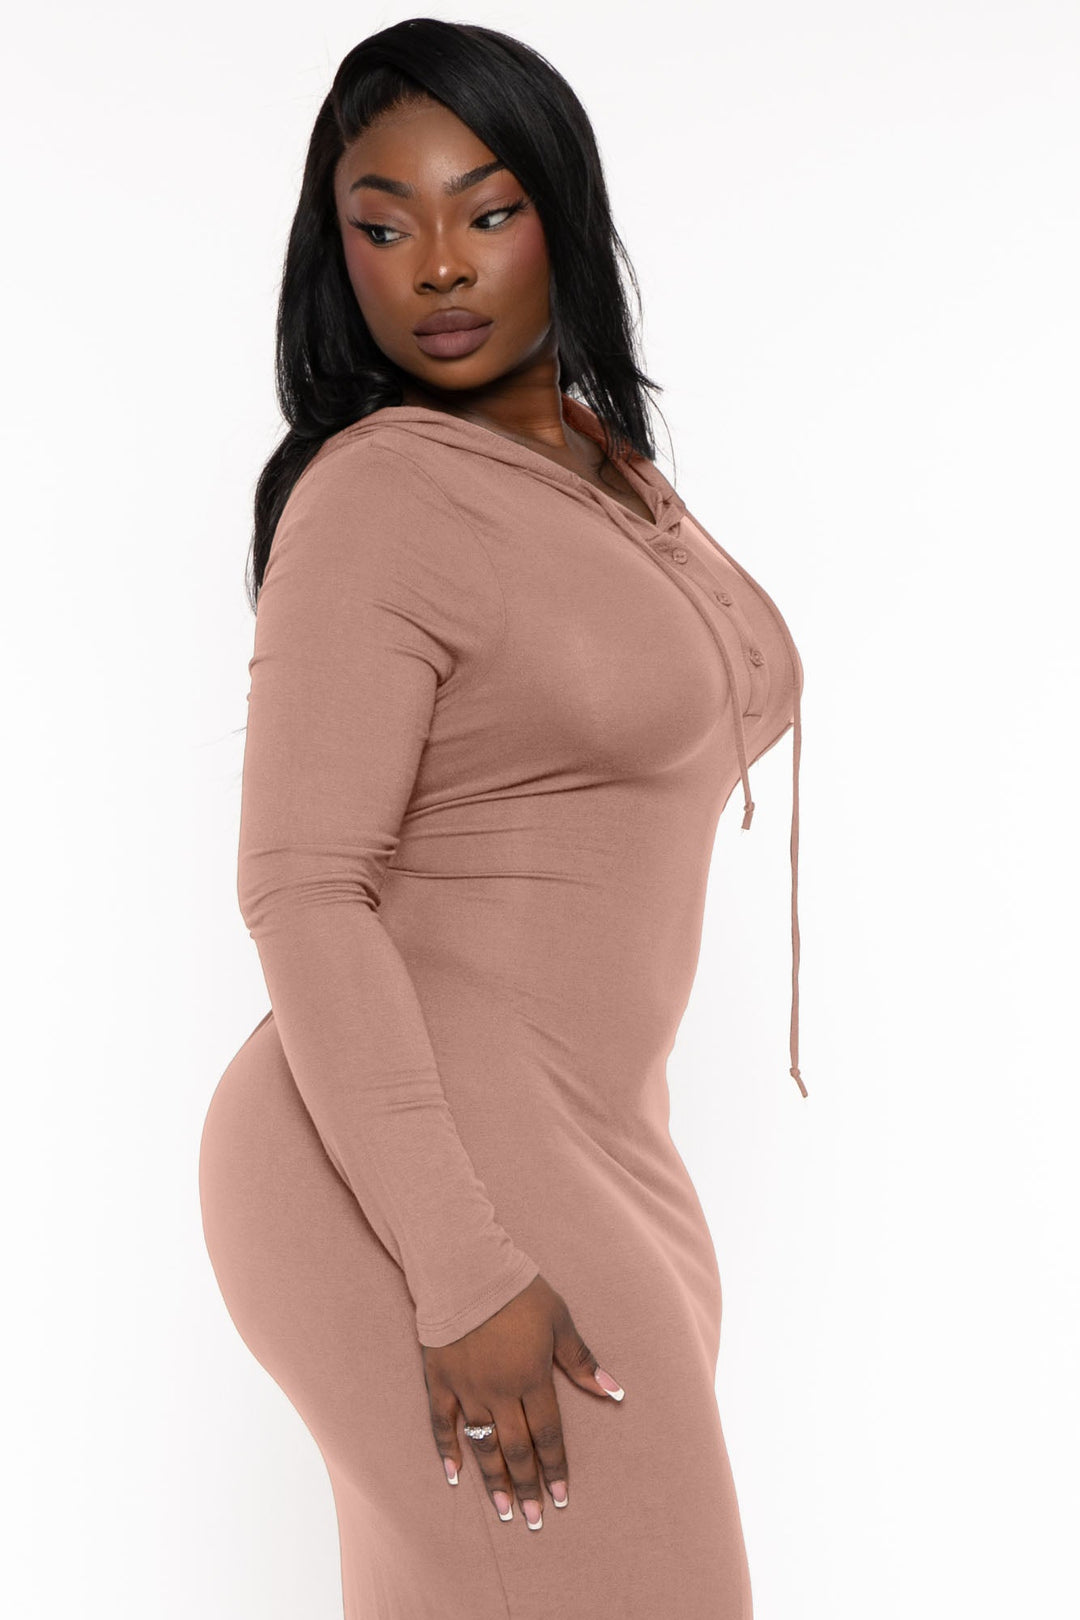 CULTURE CODE Dresses Plus Size Adrienne Hoodie Maxi  Dress - Taupe